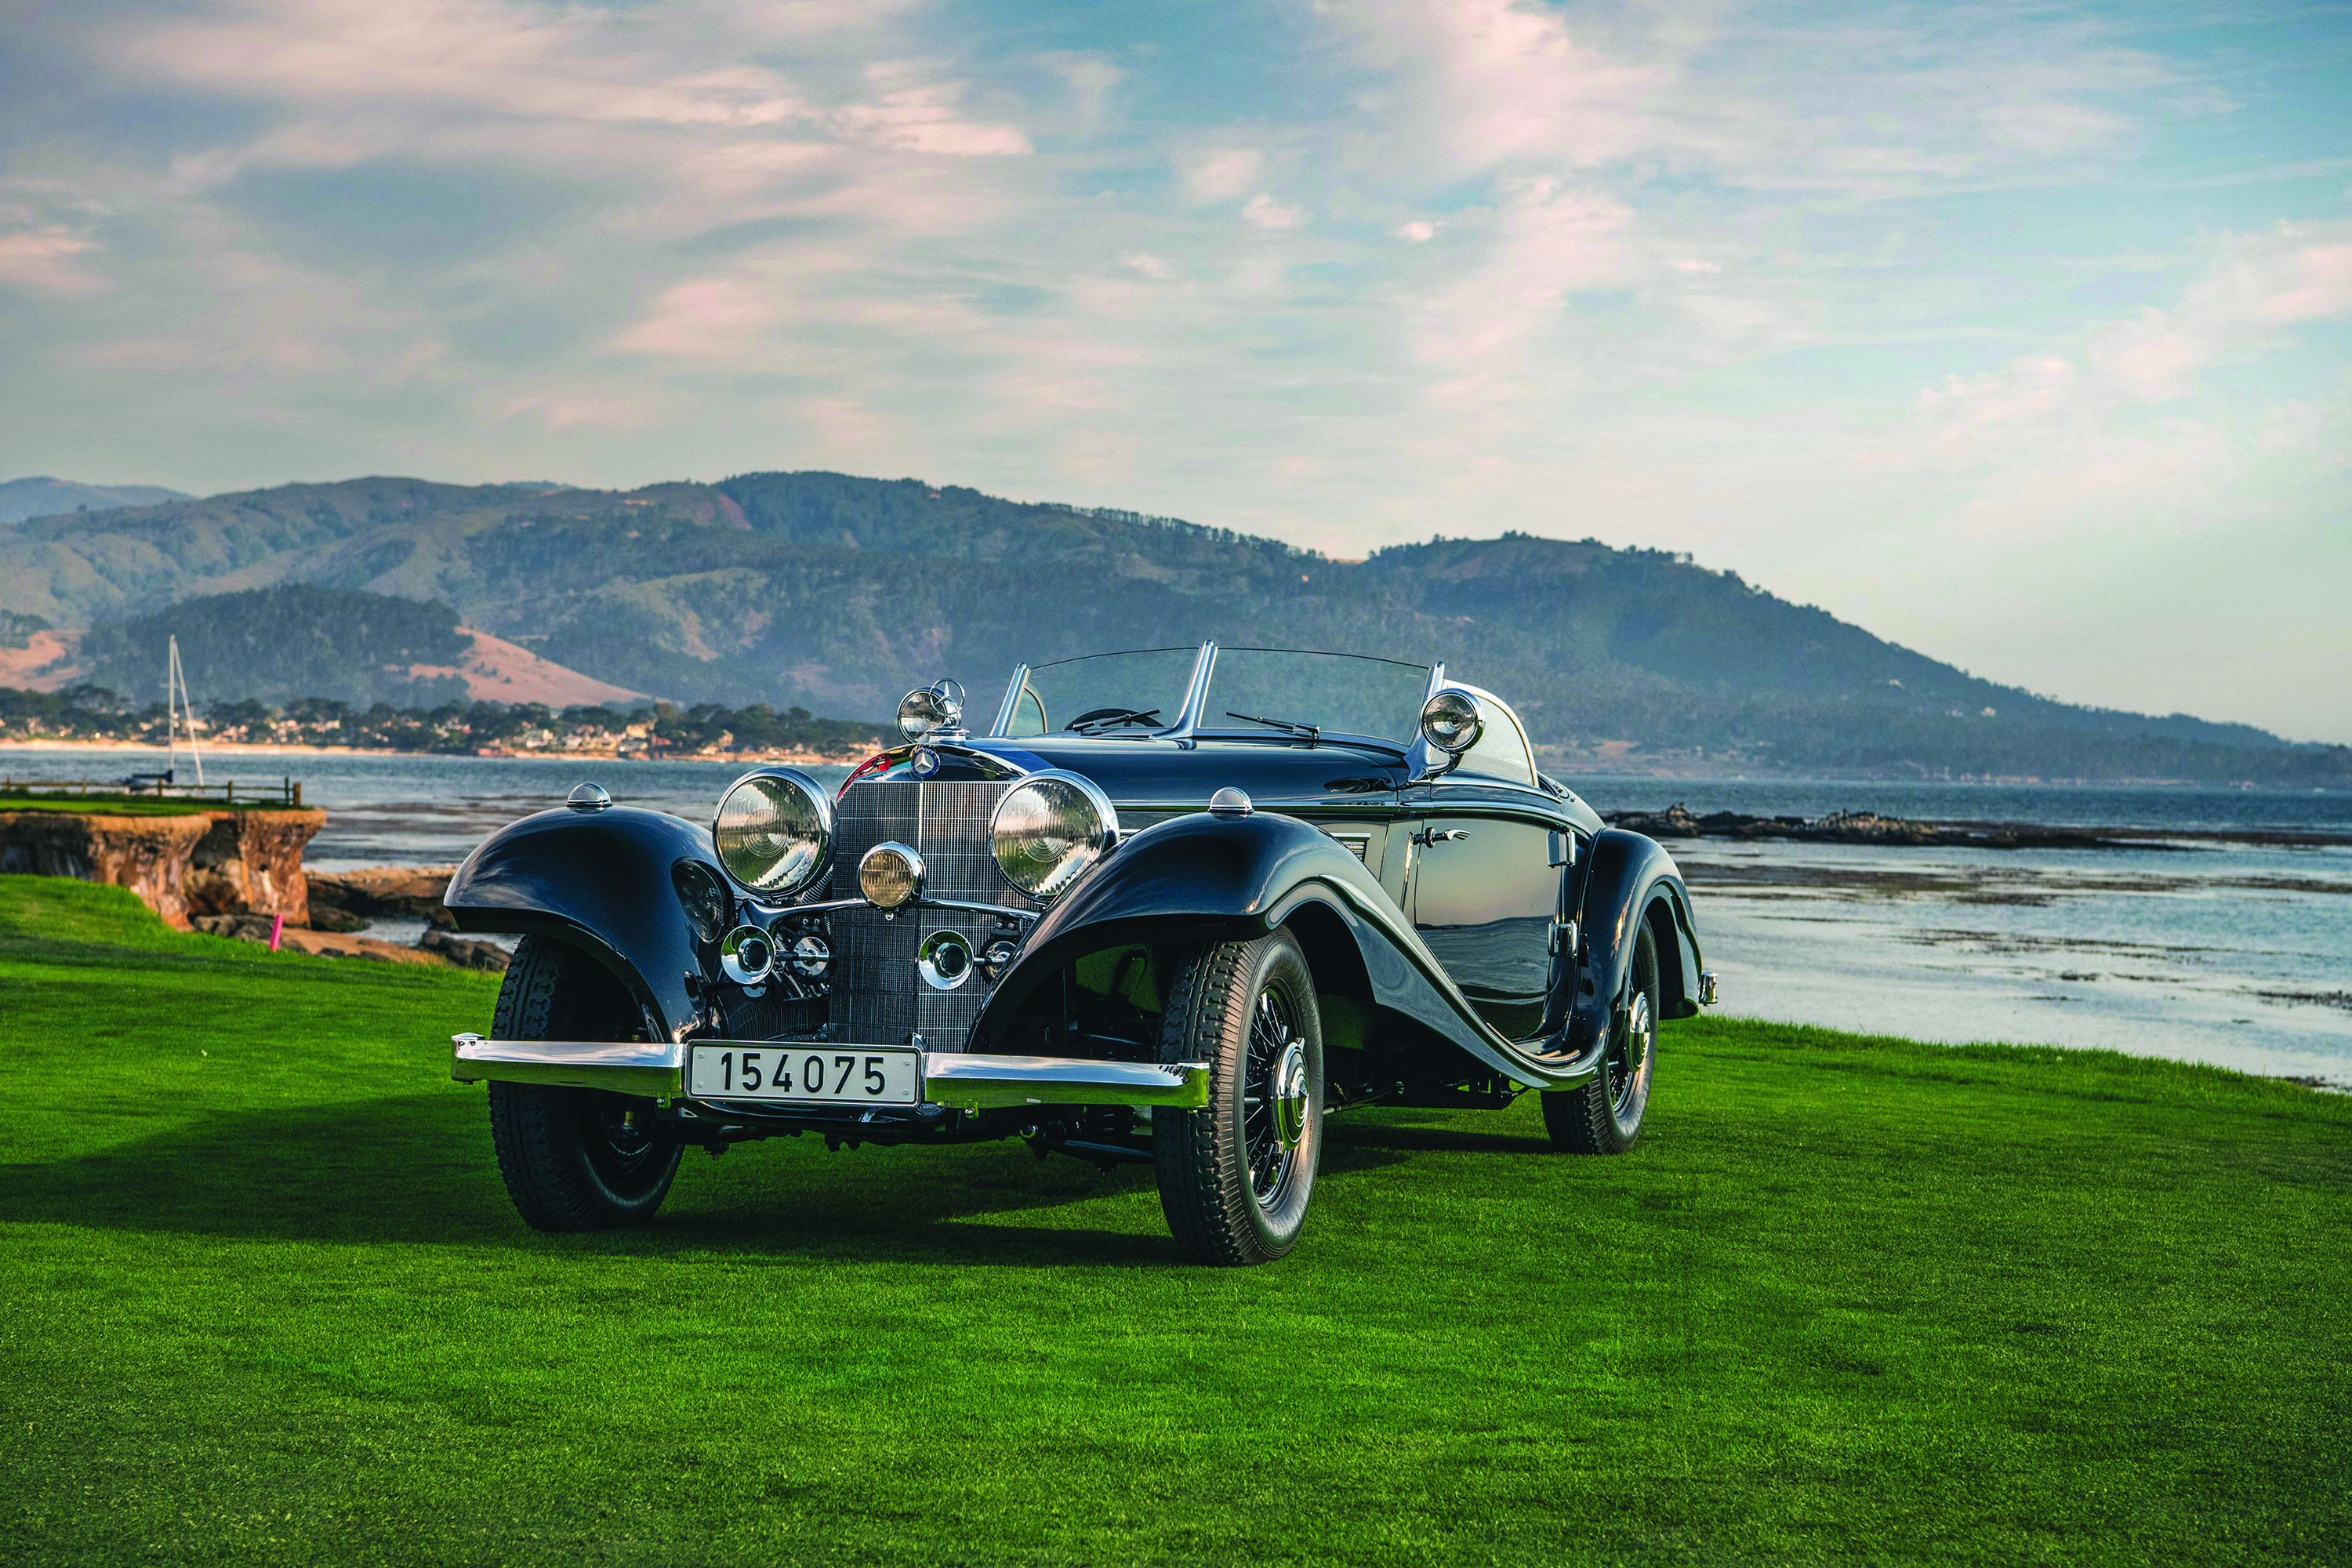 The Mercedes-Benz 540 K Was Germany's Finest Pre-War Car